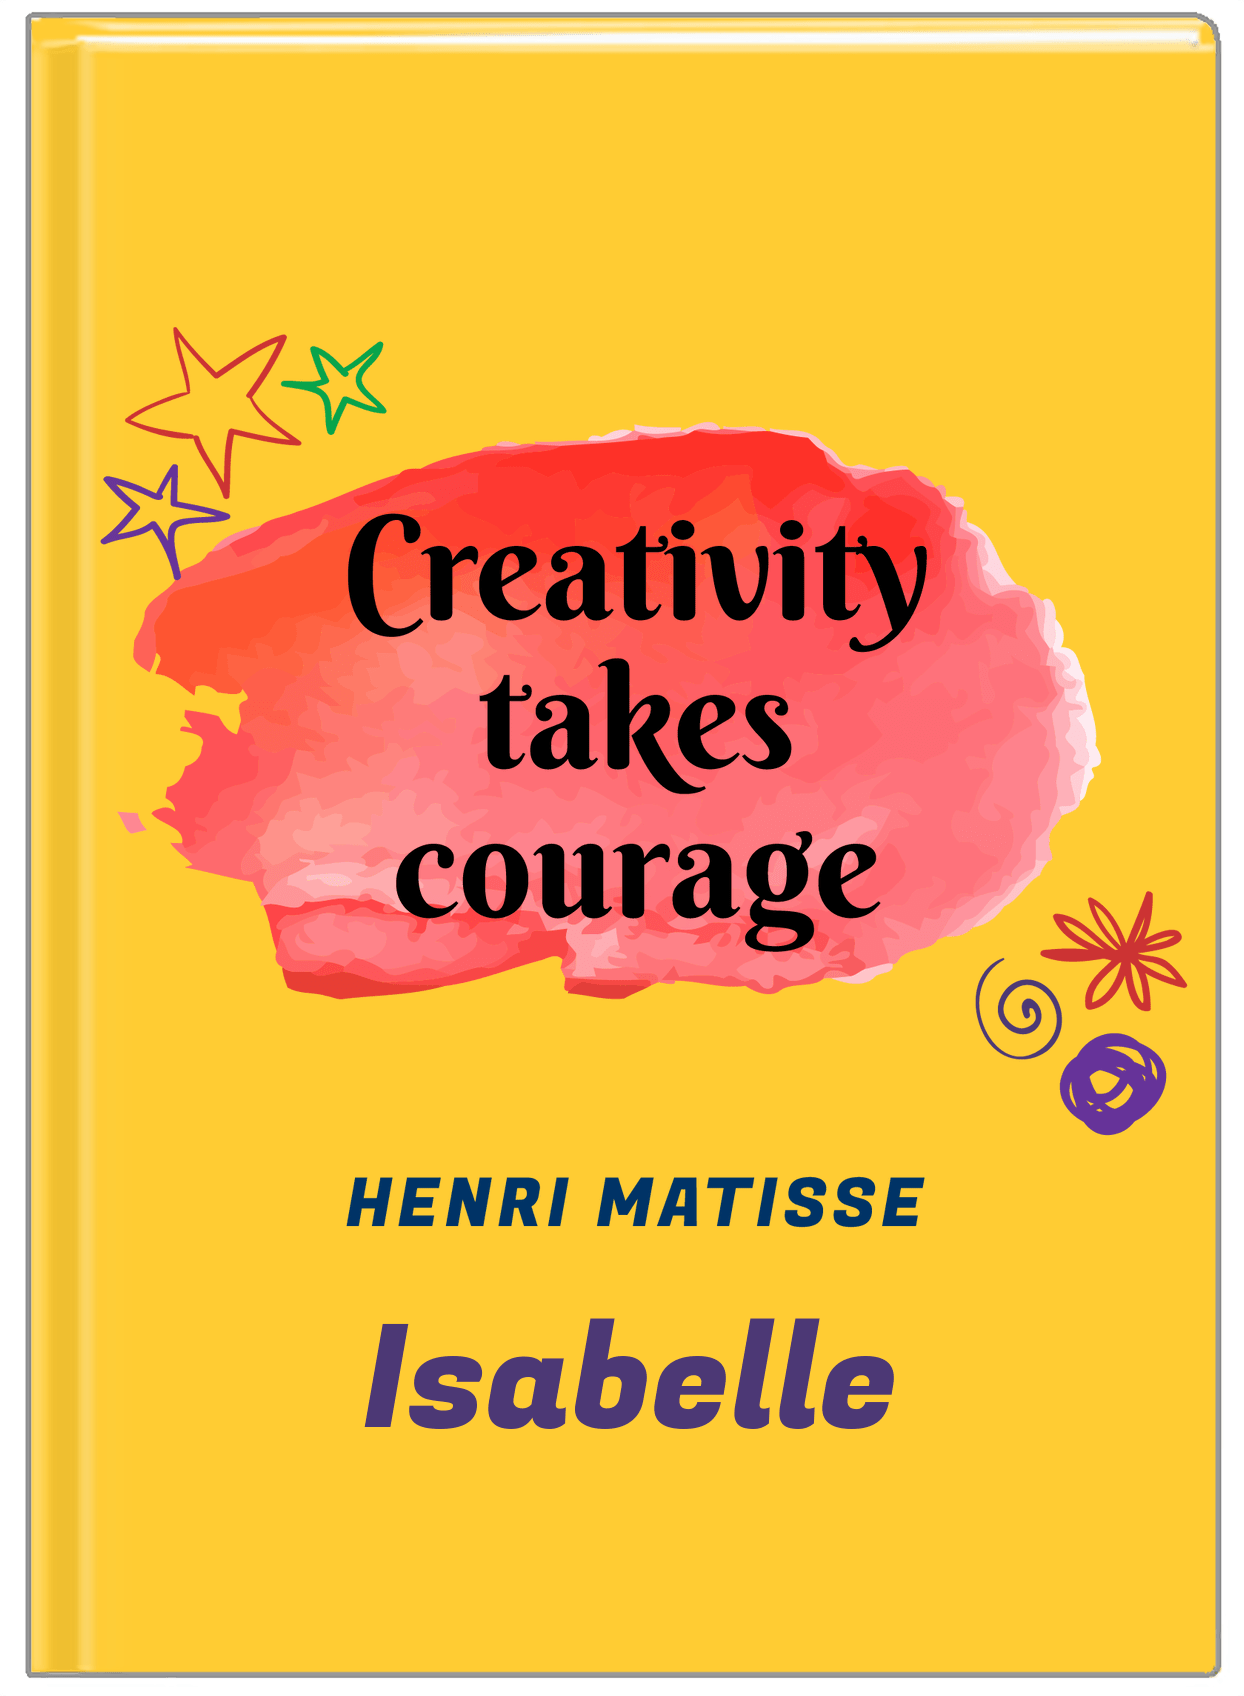 Personalized Famous Quotes Journal - Henri Matisse - Front View